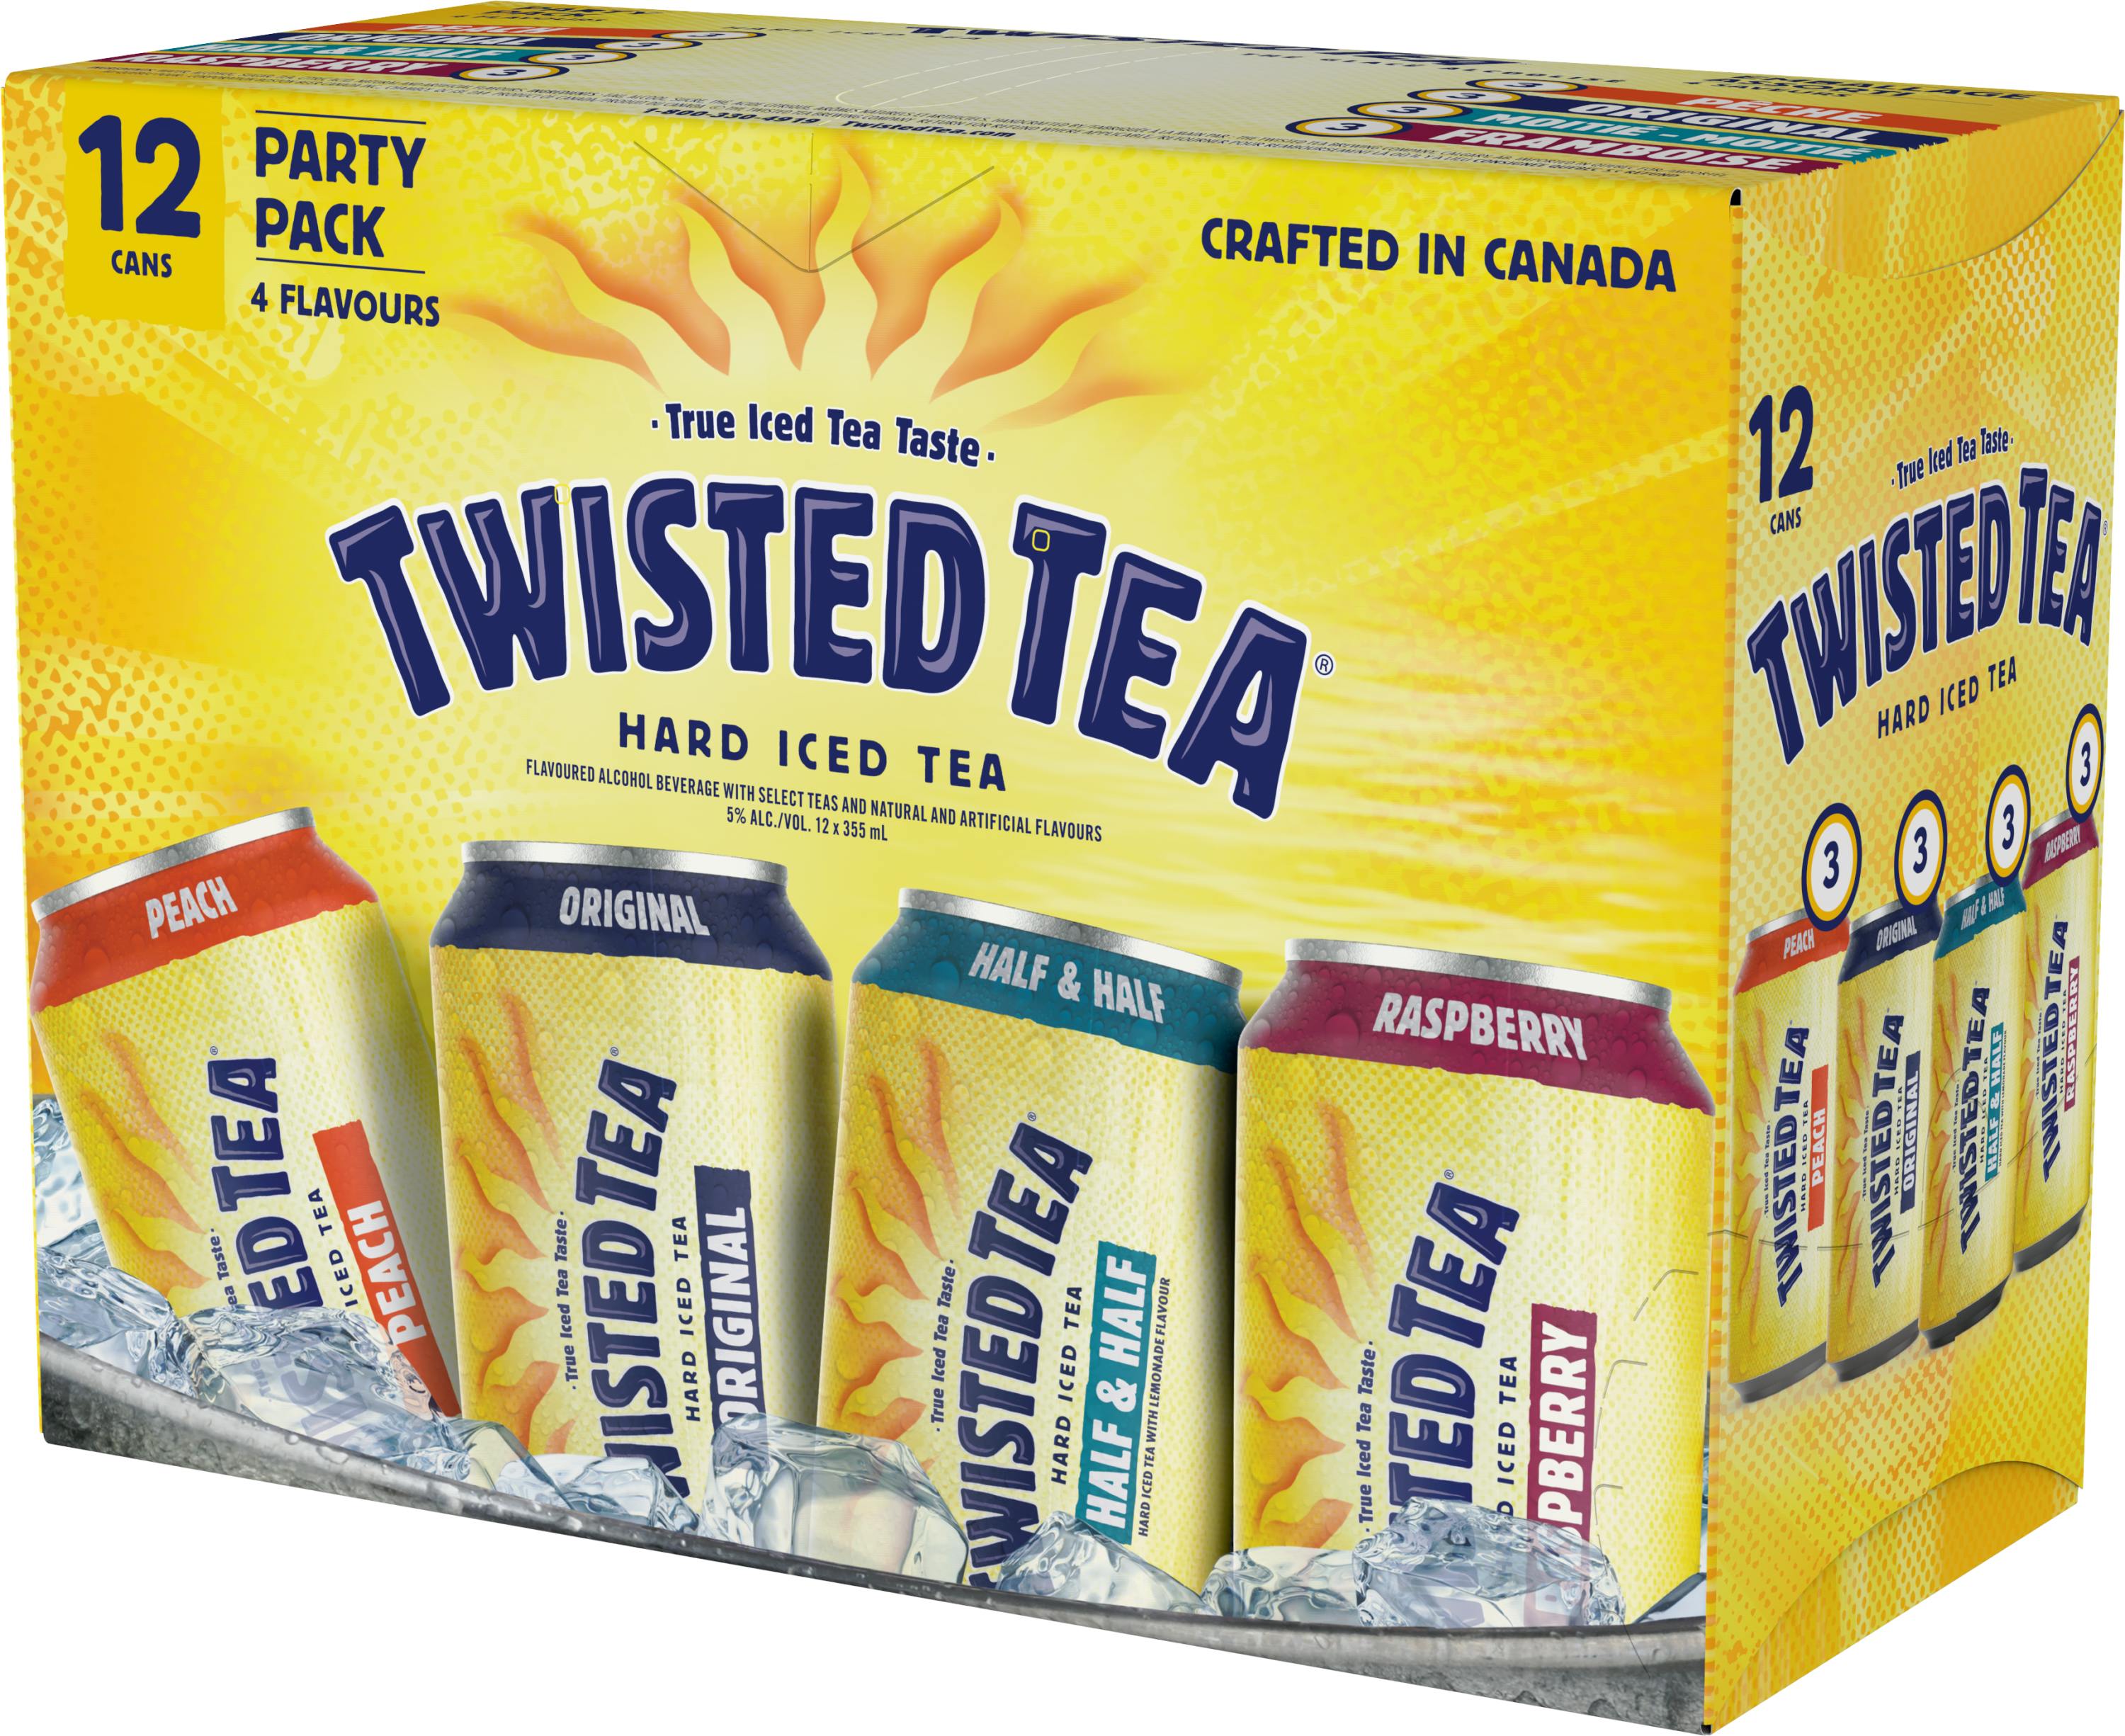 lifehack freeze a Twisted Tea bag in a box if you have a long day of , Twisted Tea